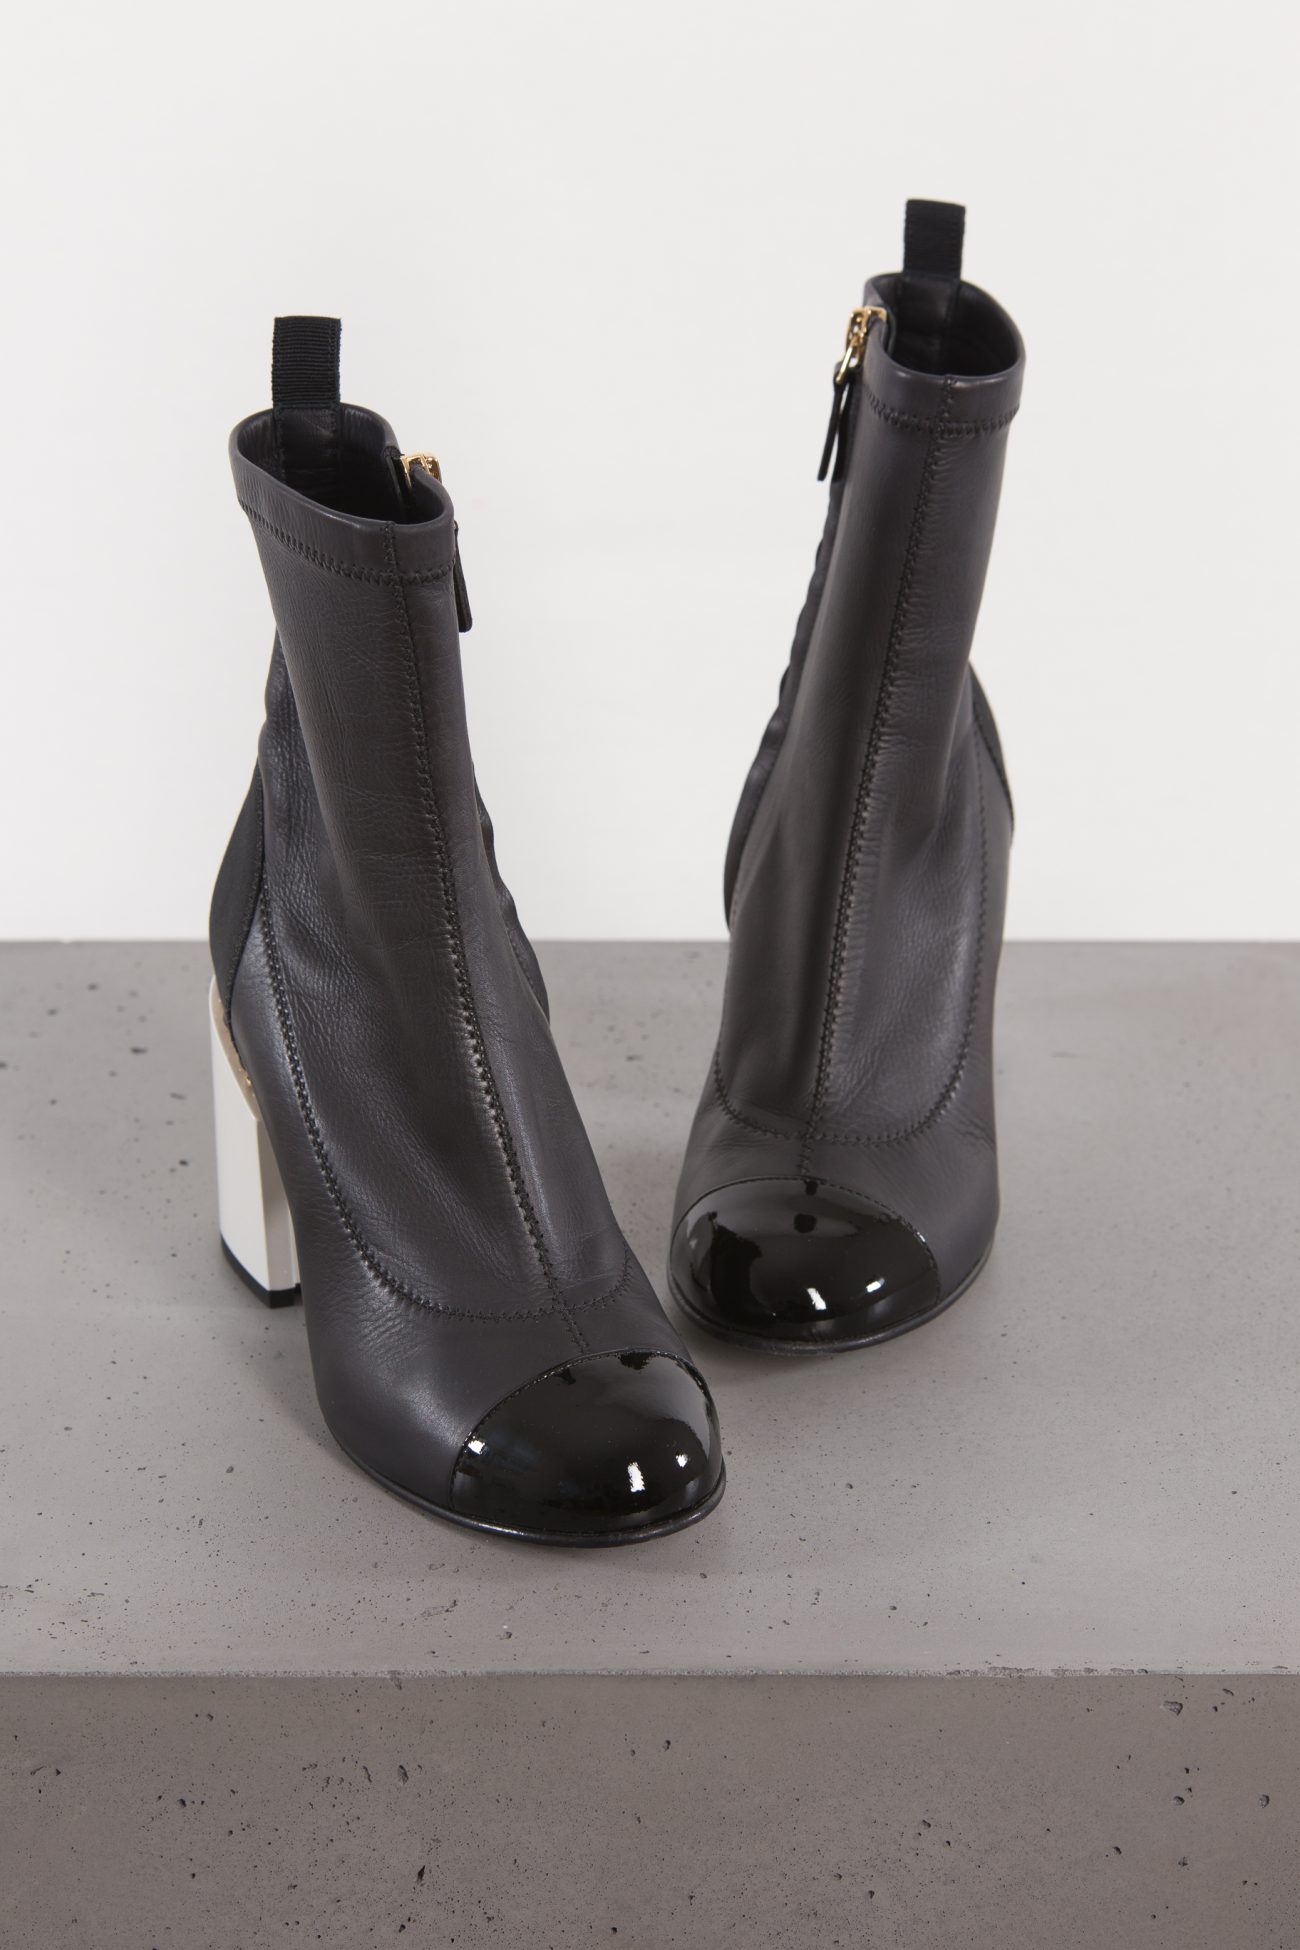 Dior Boots, 36.5 - Huntessa Luxury Online Consignment Boutique